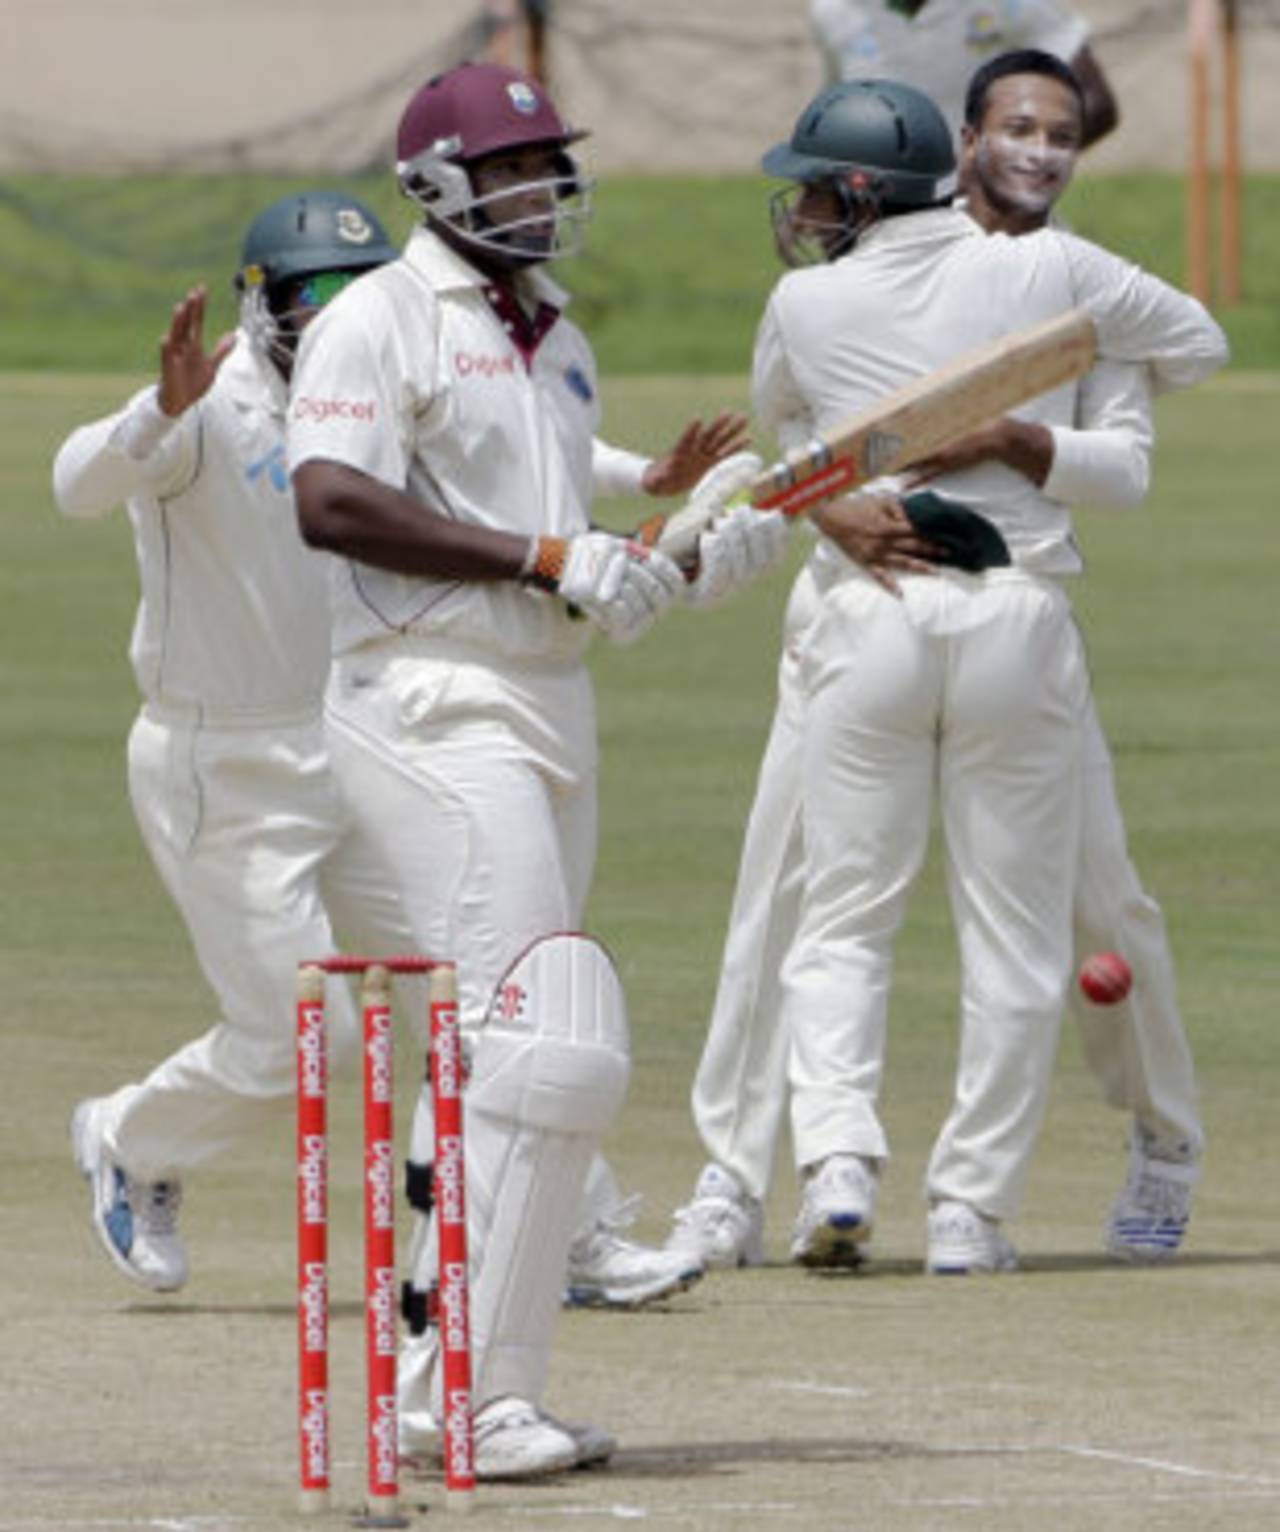 Ryan Hinds is dismissed for 2, West Indies v Bangladesh, 2nd Test, Grenada, 3rd day, July 19, 2009 